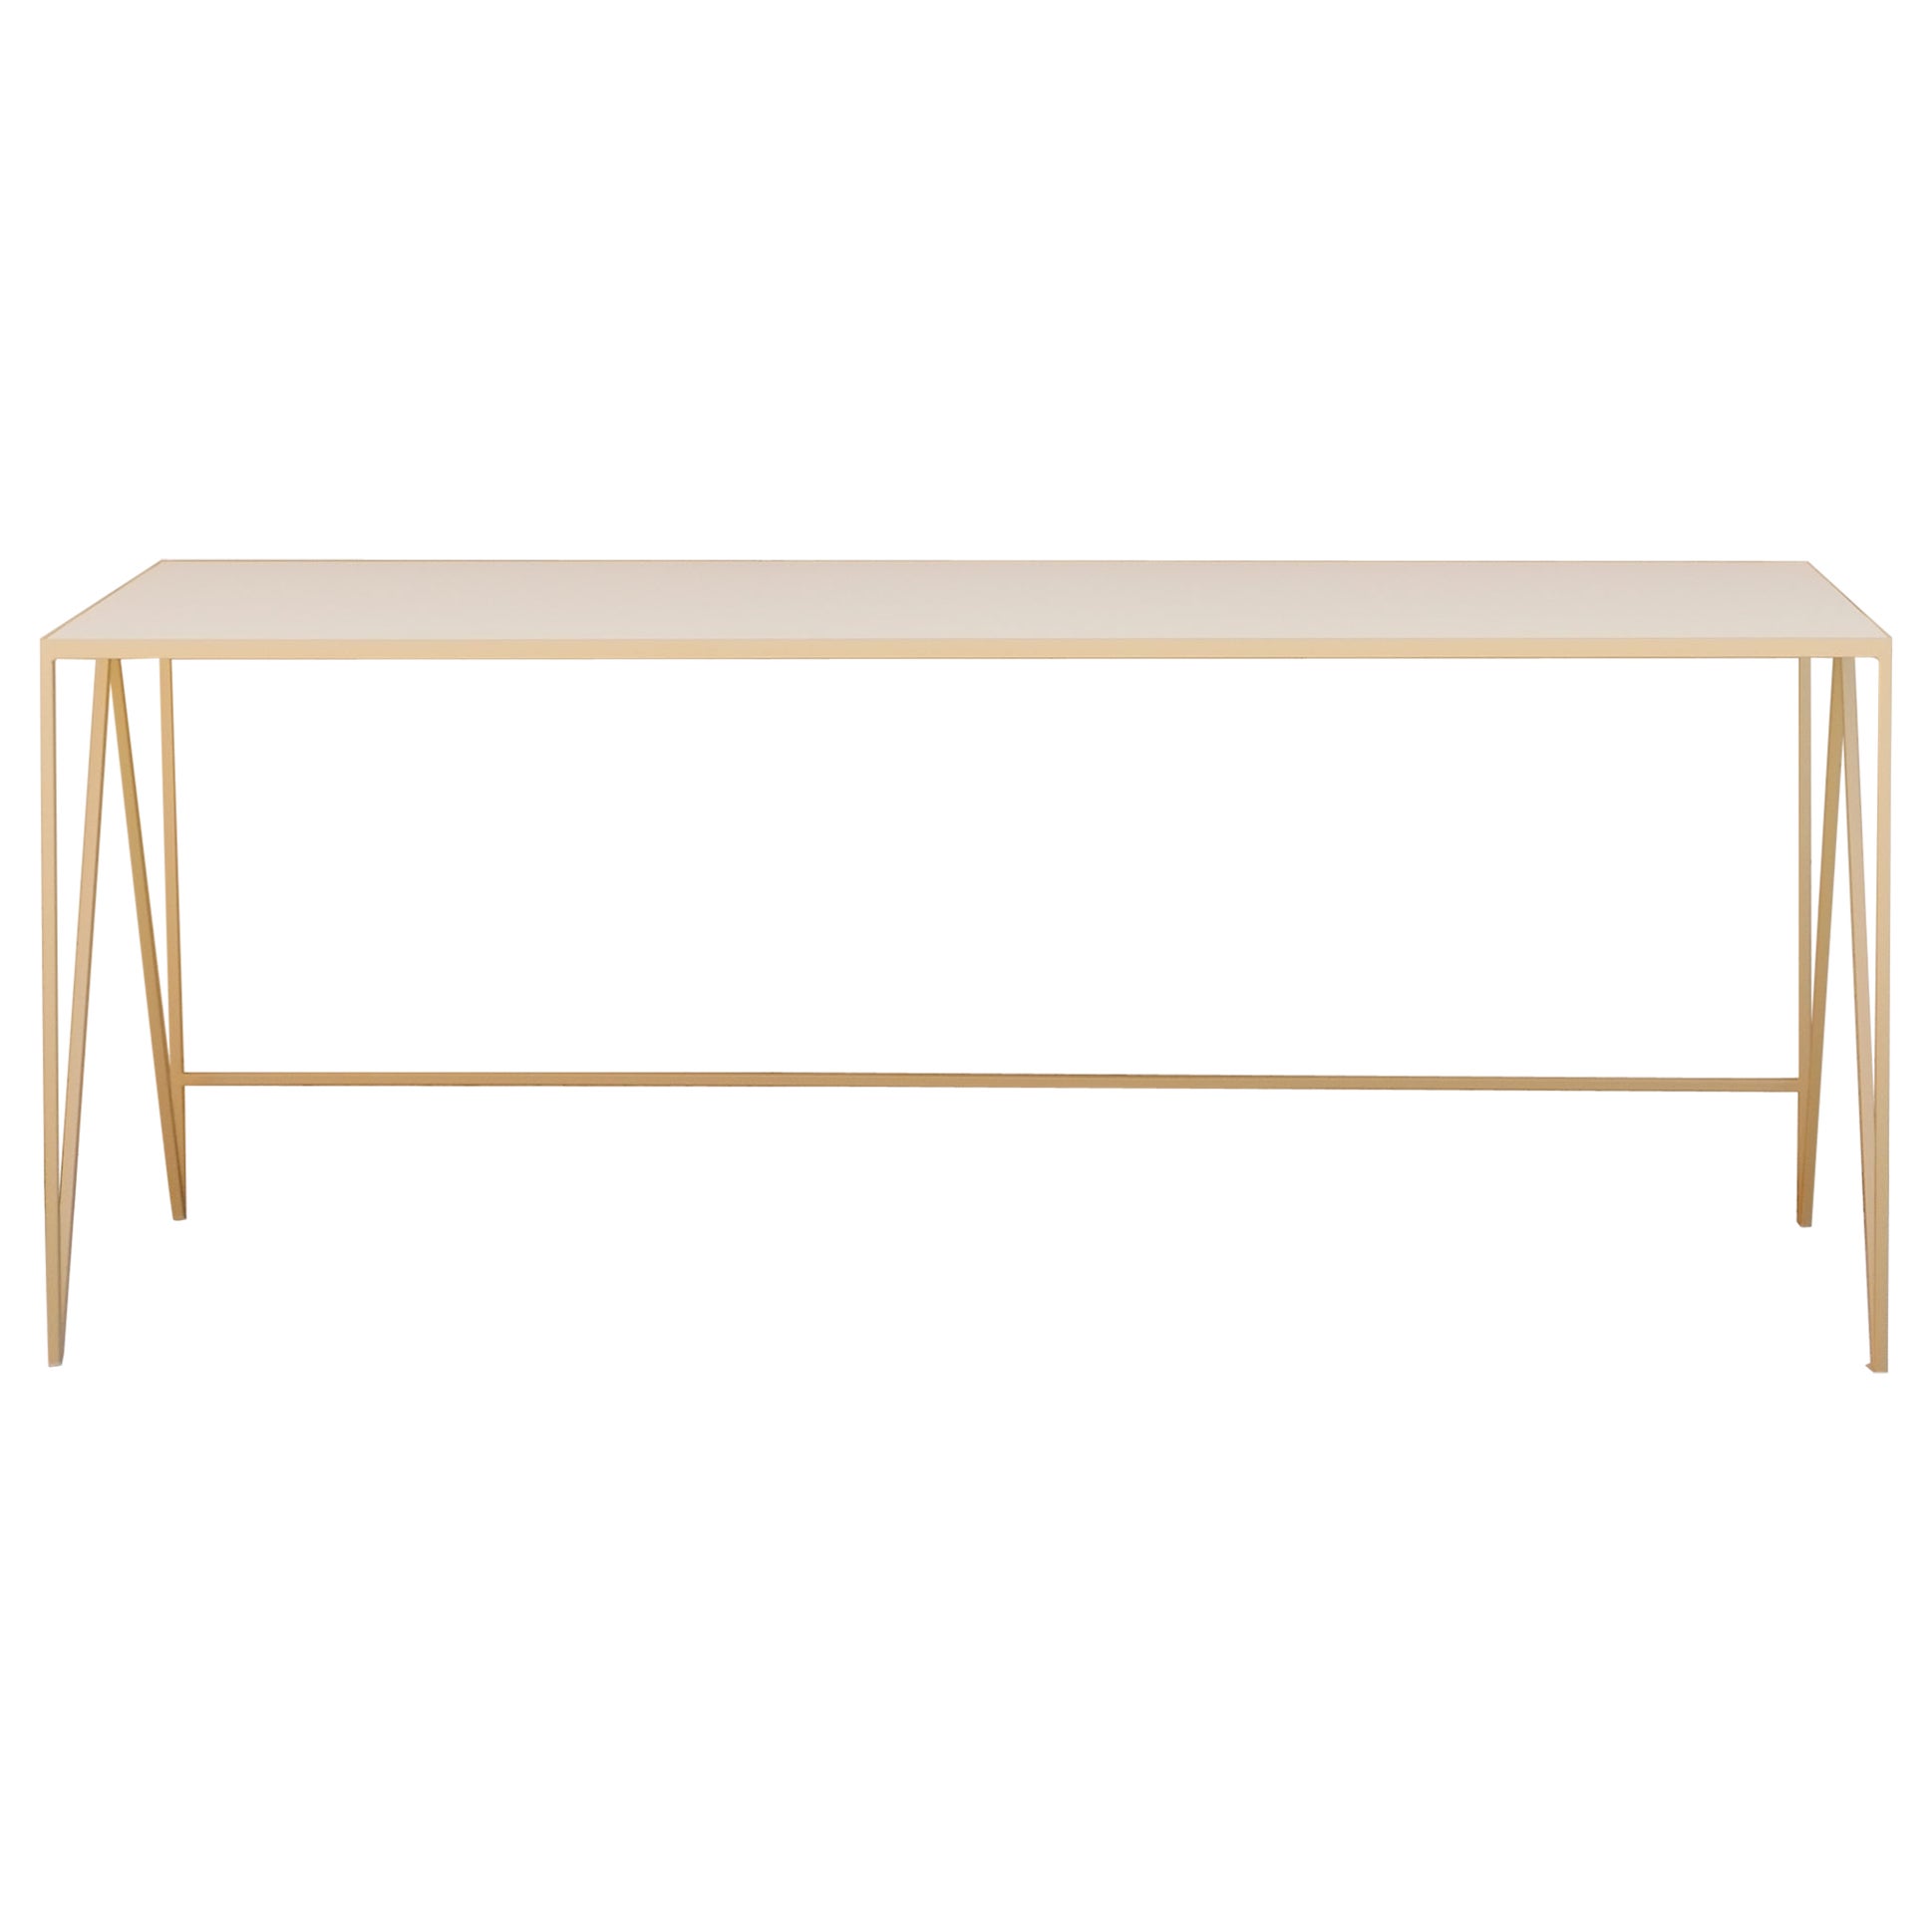 Long Study Desk / Large Console Table in Beige Linoleum and Steel